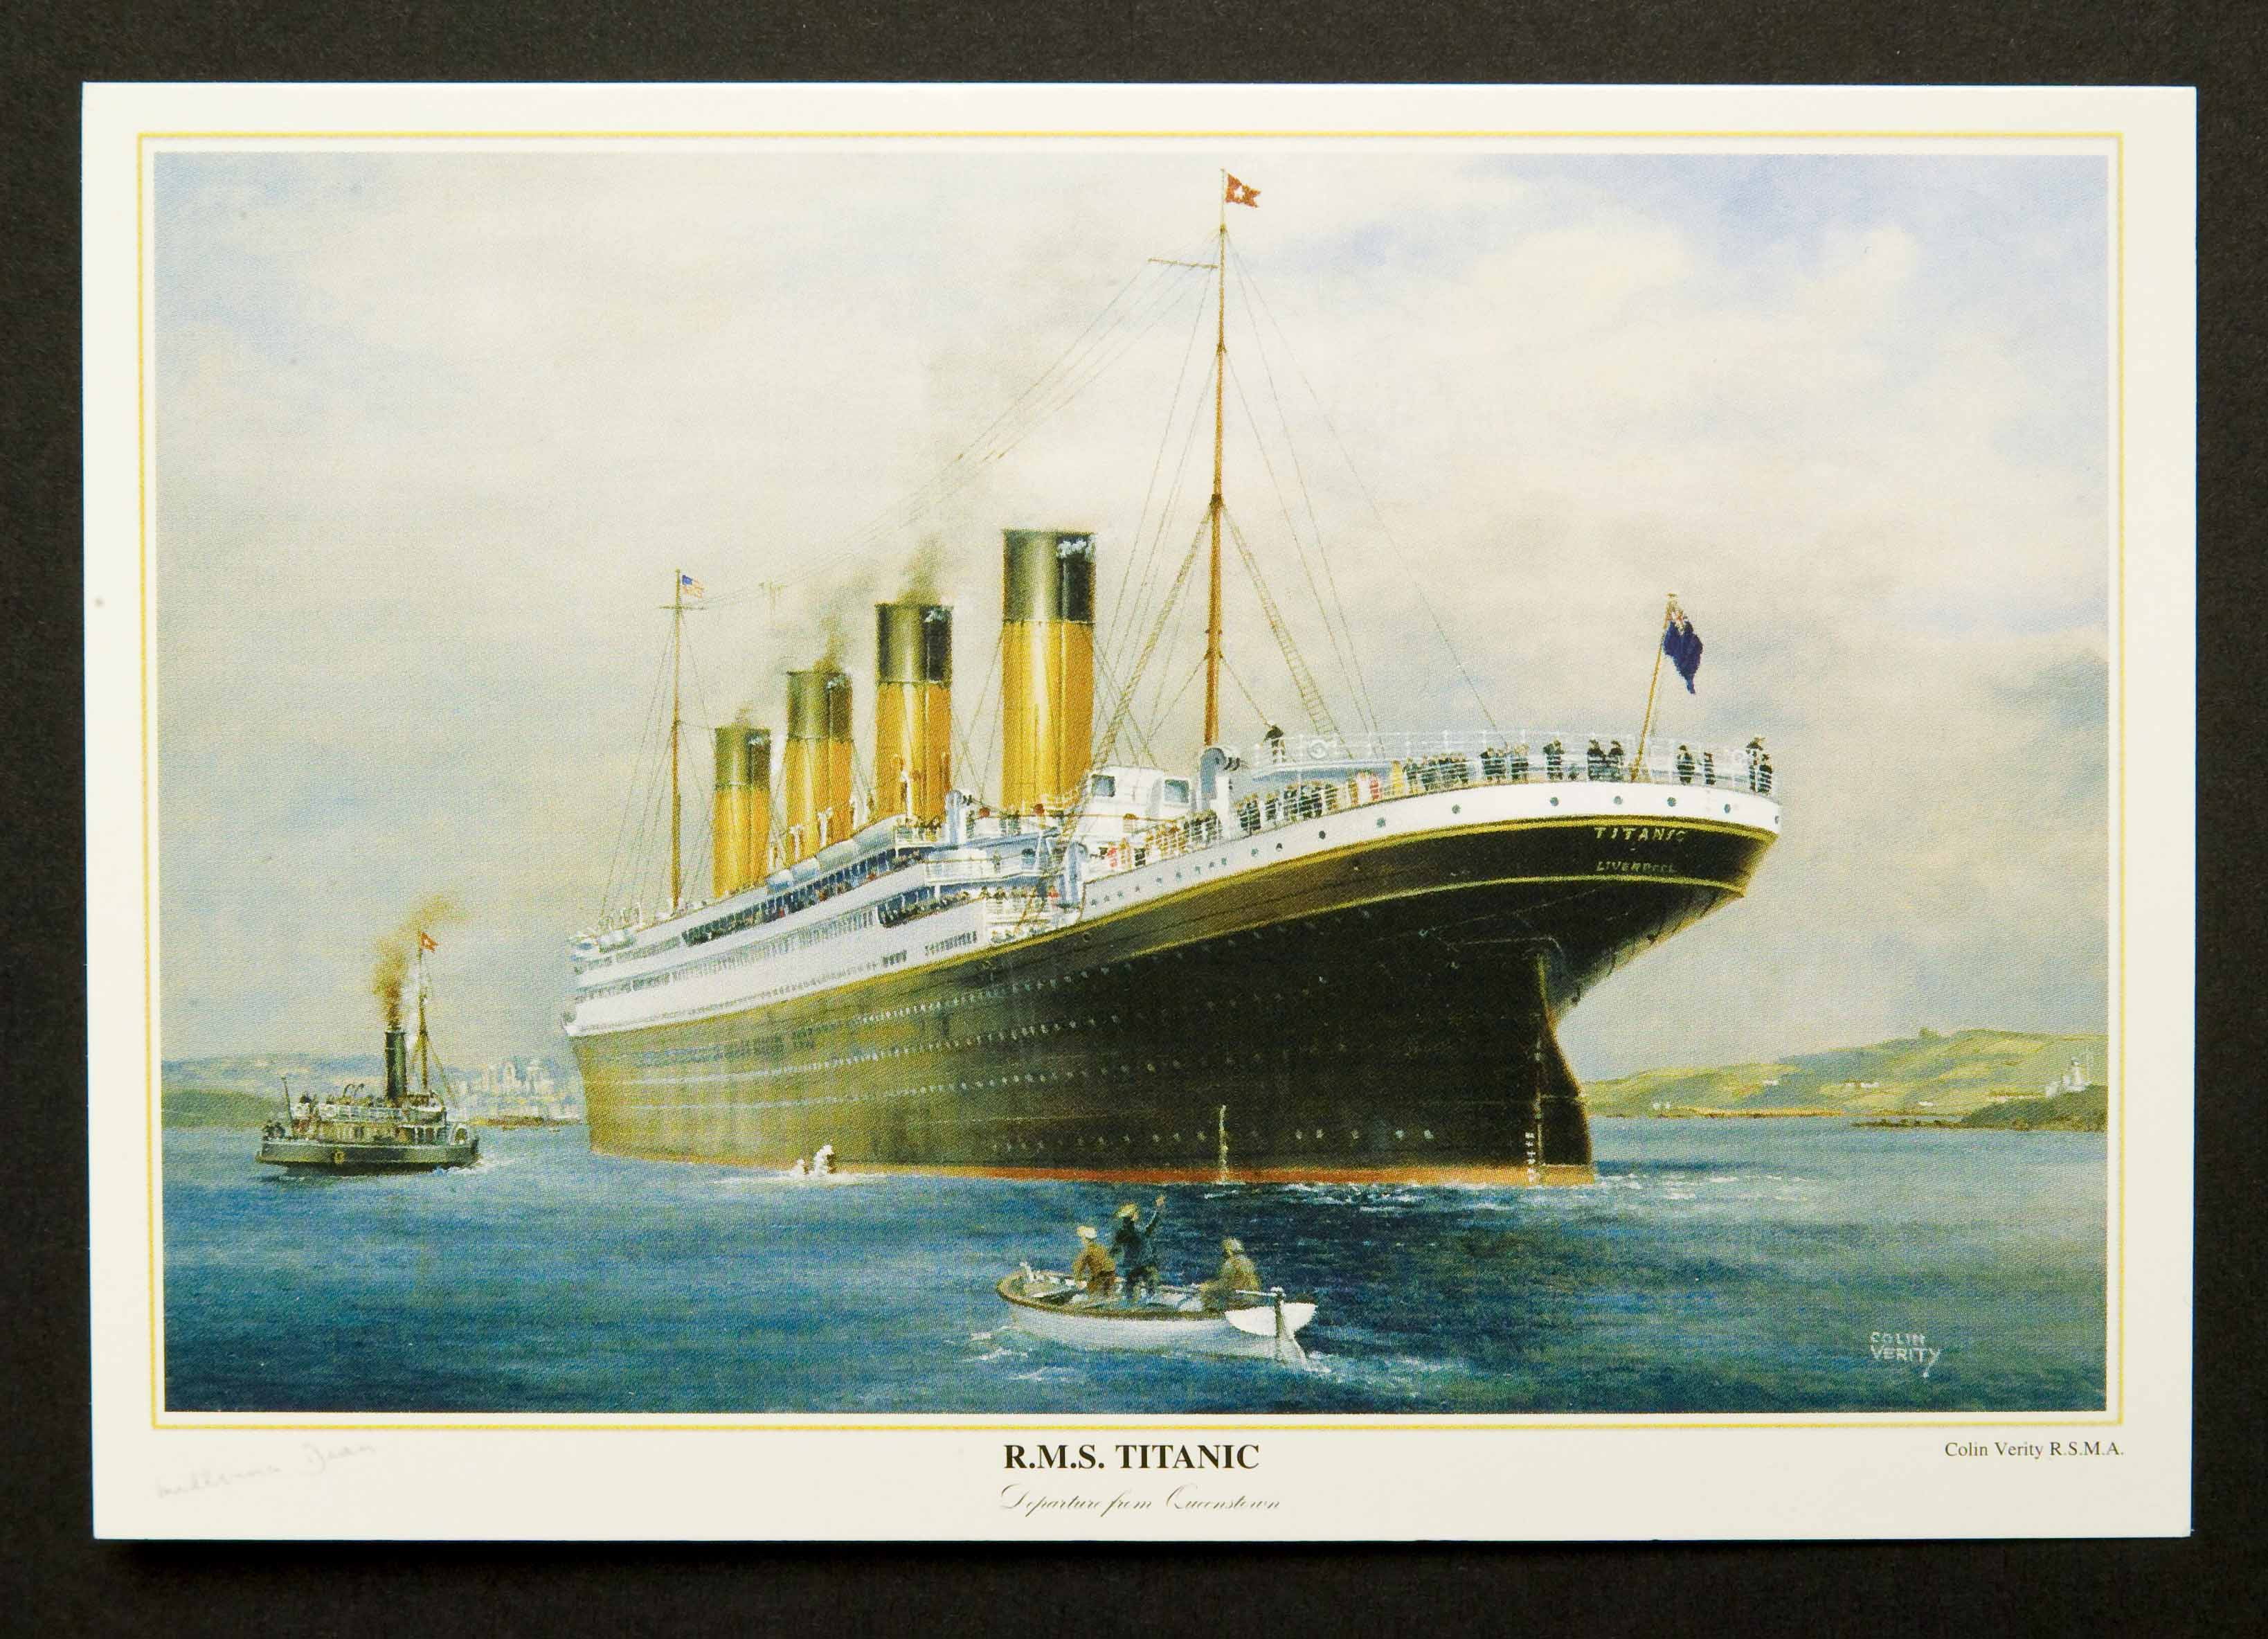 " R.M.S. Titanic" Postcards (6) by Colin Verity